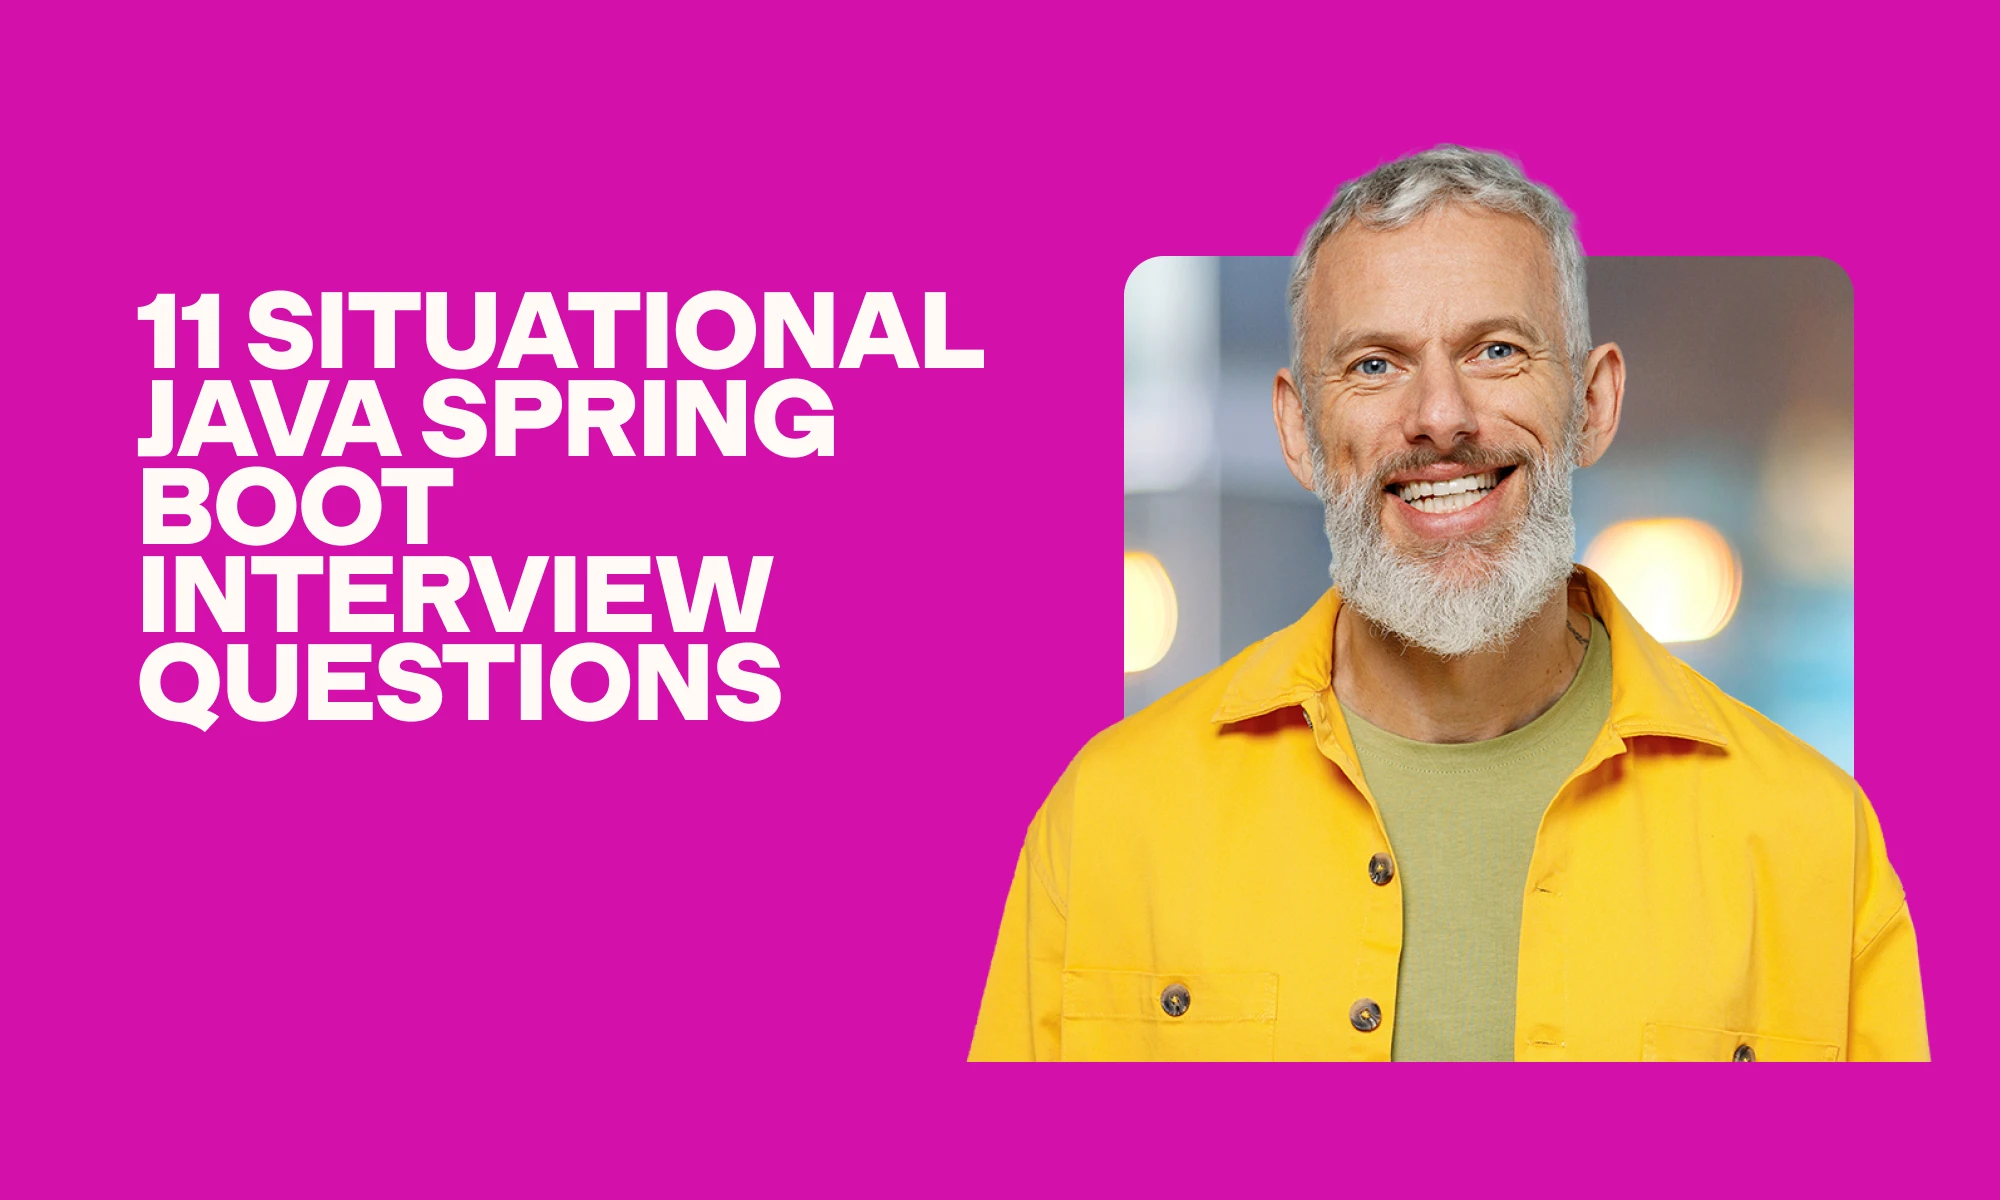 11 situational Java Spring Boot interview questions to ask applicants